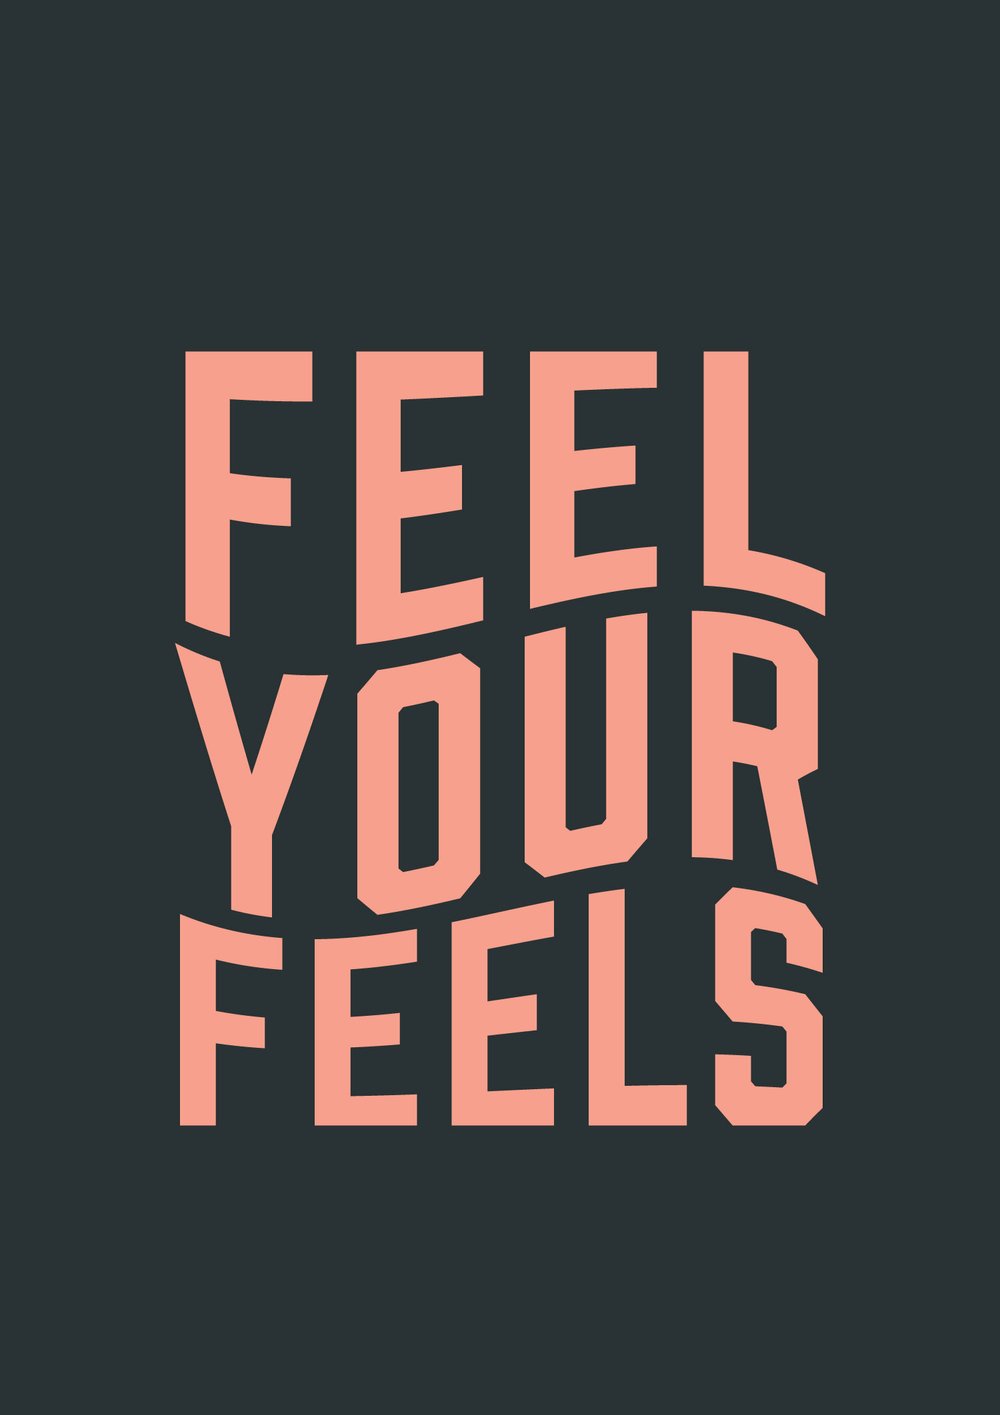 Feel Your Feels — The Native State